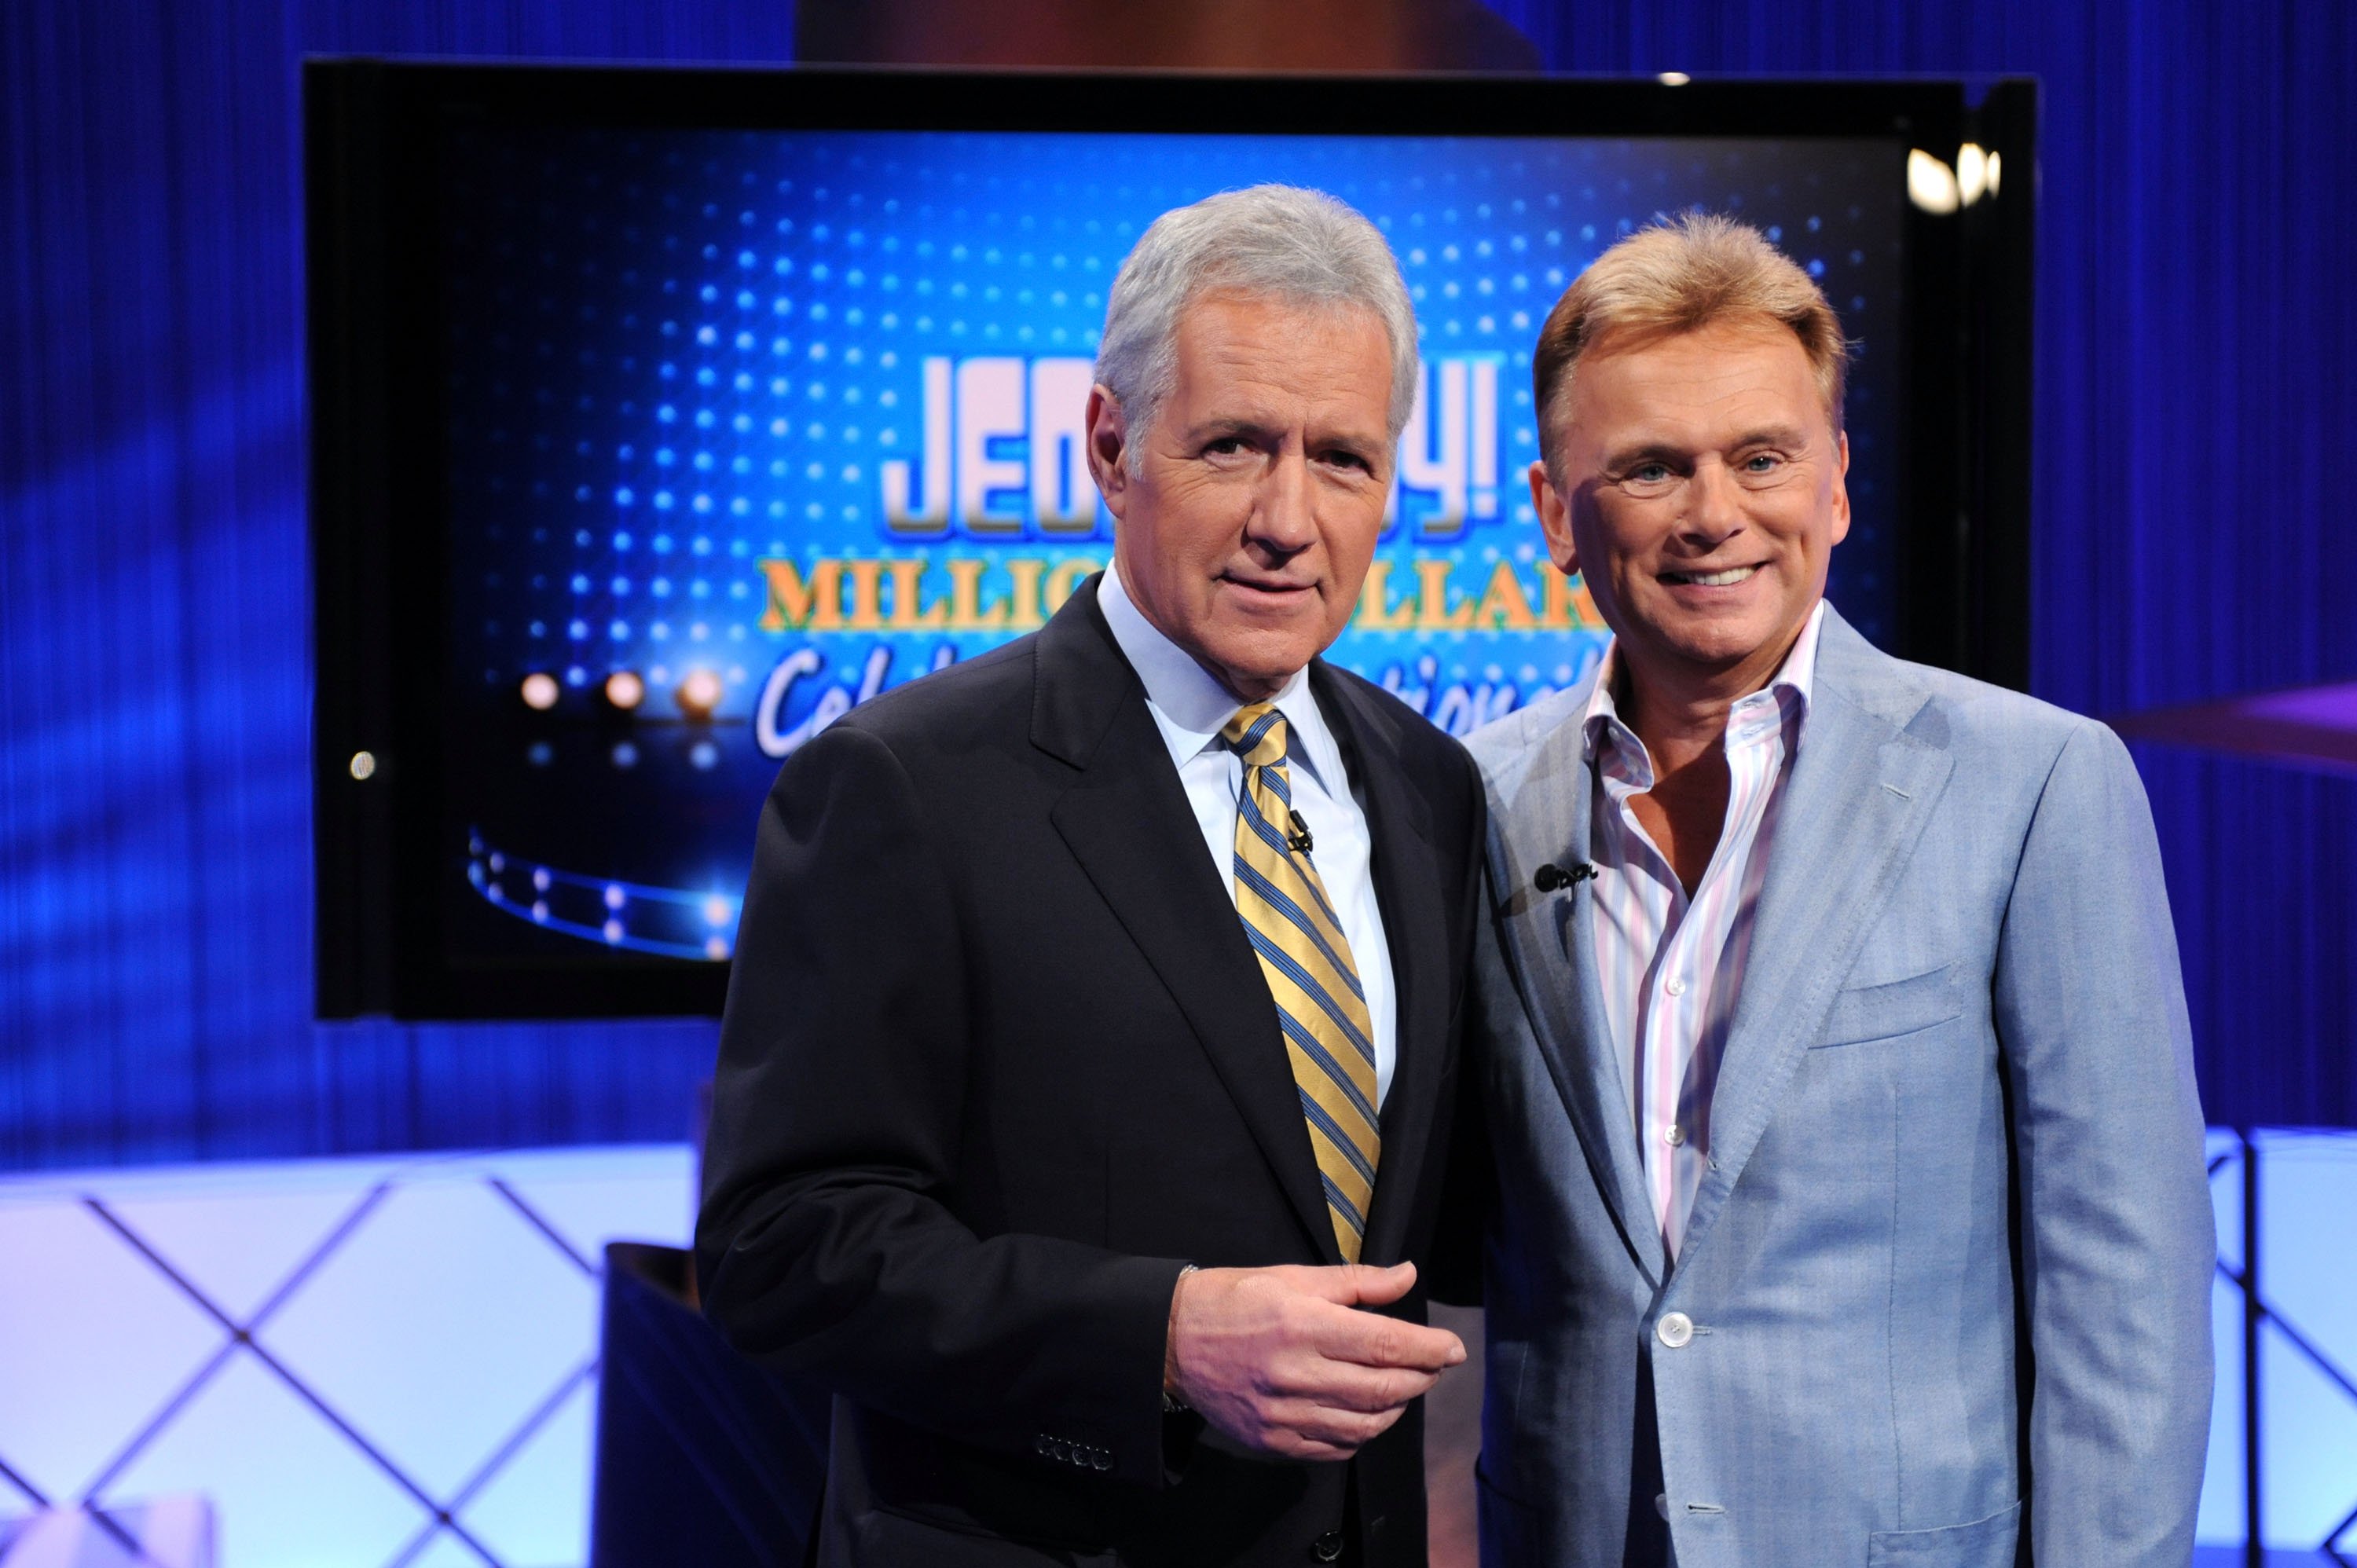 left to right: Alex Trebek of 'Jeopardy!' and Pat Sajak of 'Wheel of Fortune'